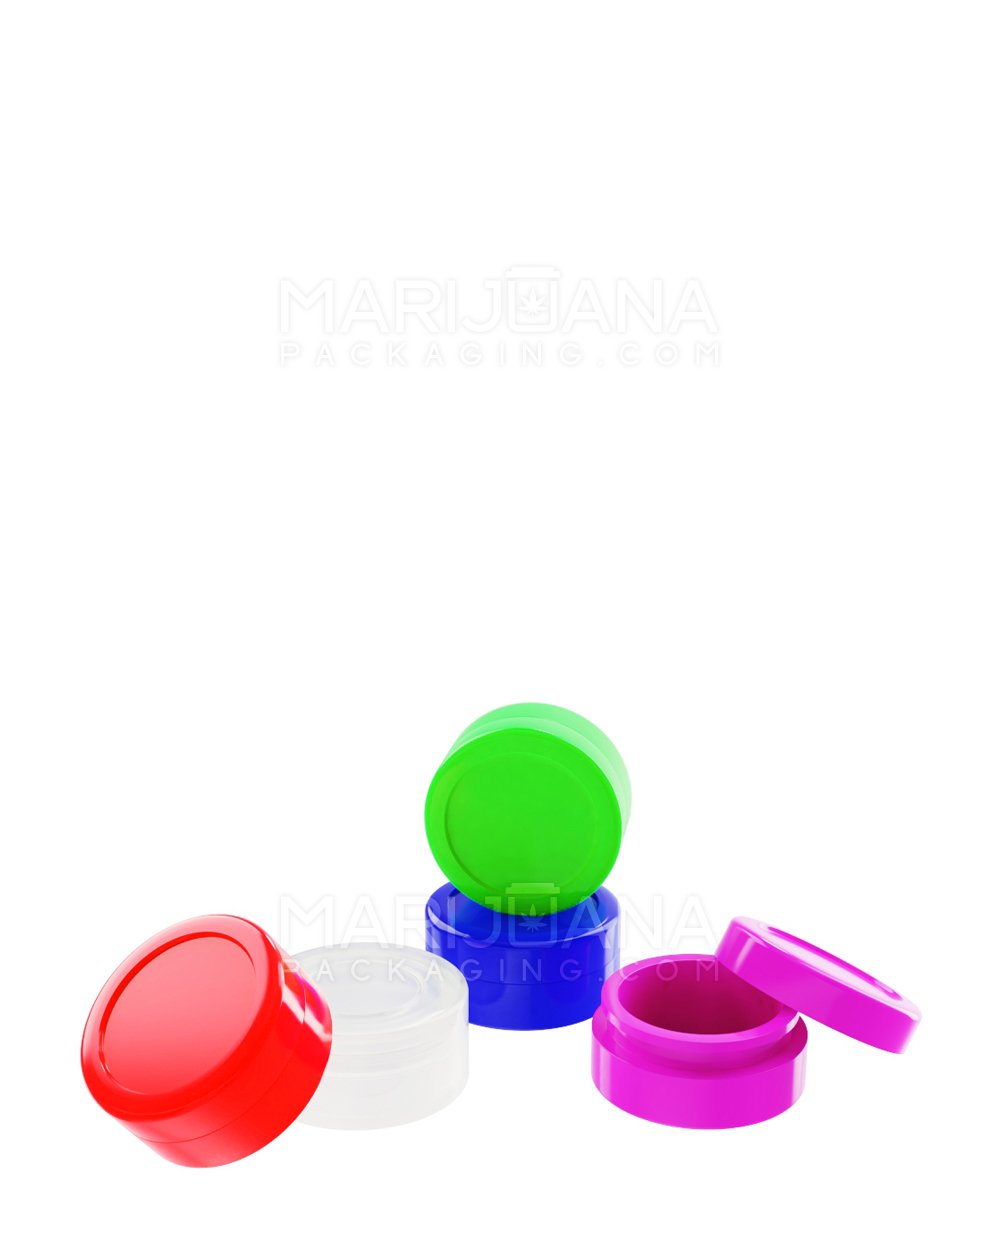 Silicone Concentrate Containers Mixed Colors 5mL - 1000 Count - 1